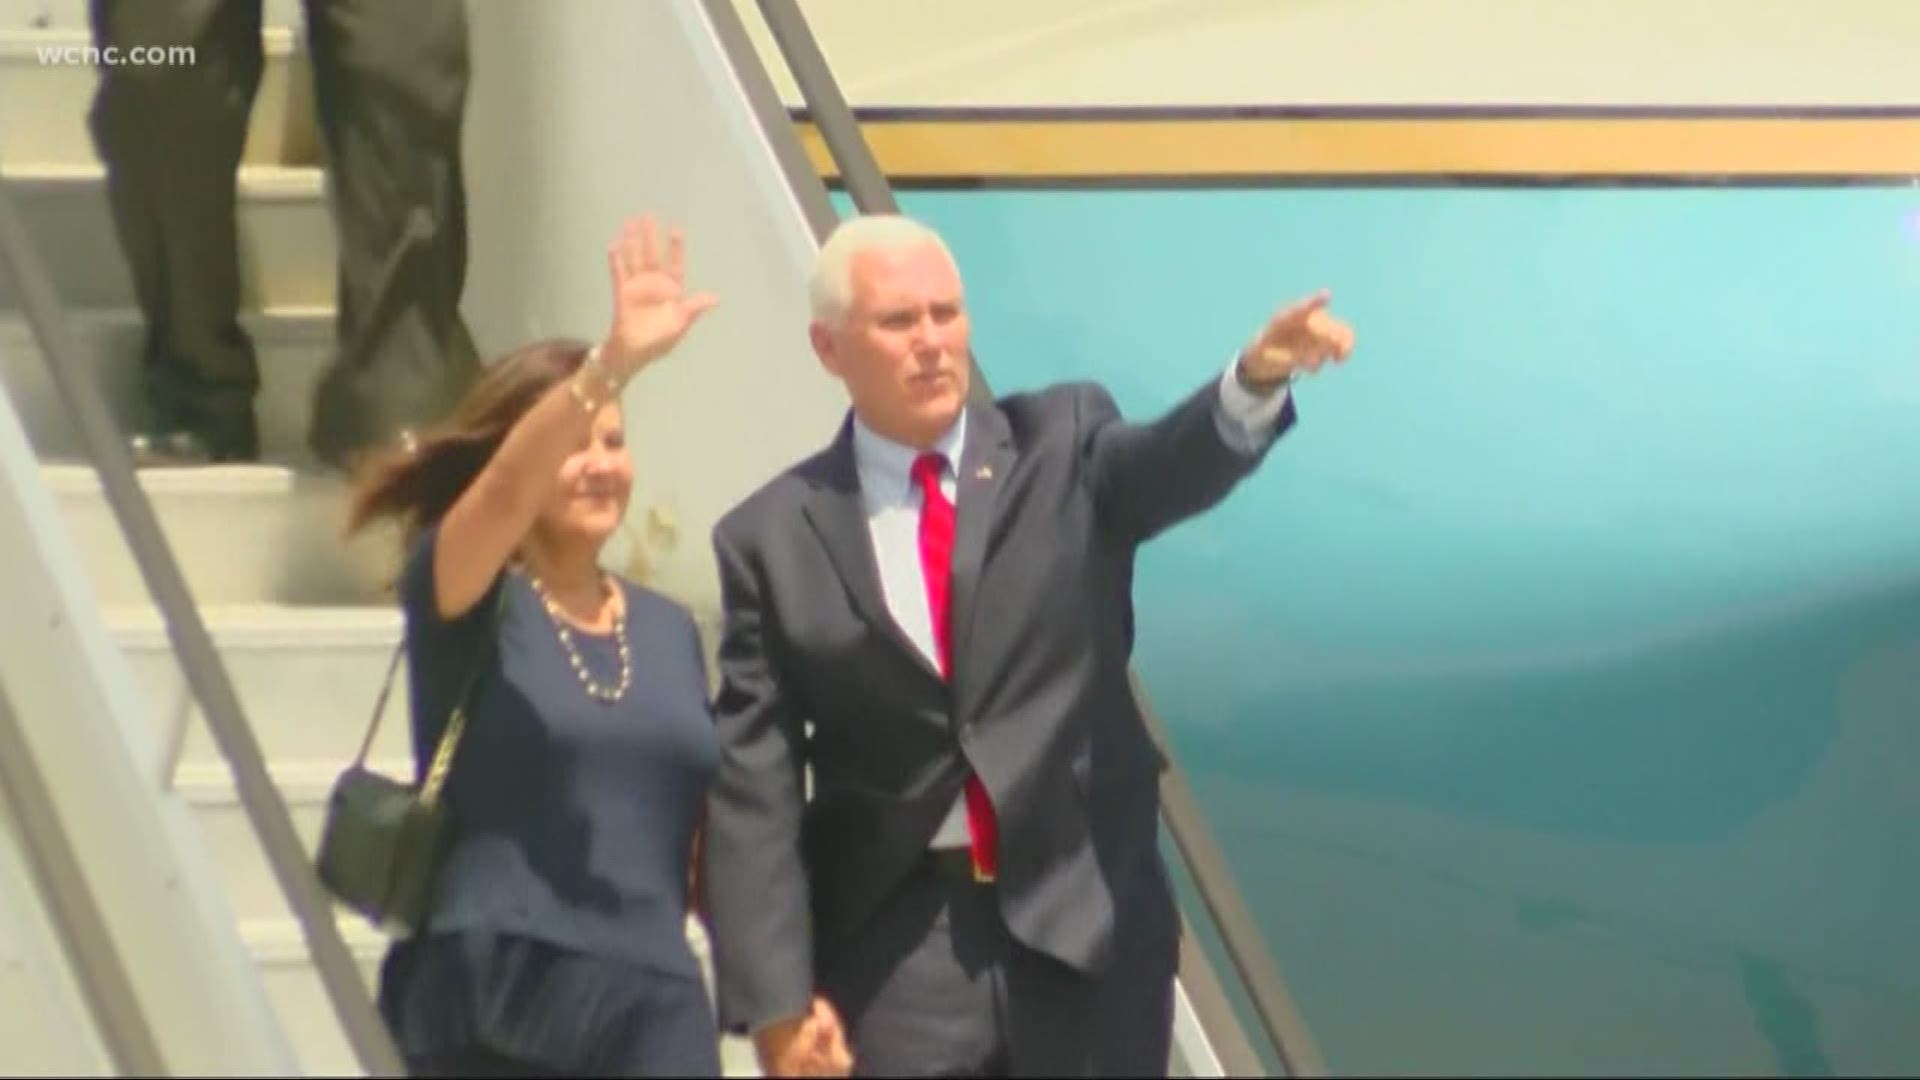 Vice President Mike Pence made an appearance at Coastal Carolina to show support for Henry McMaster.